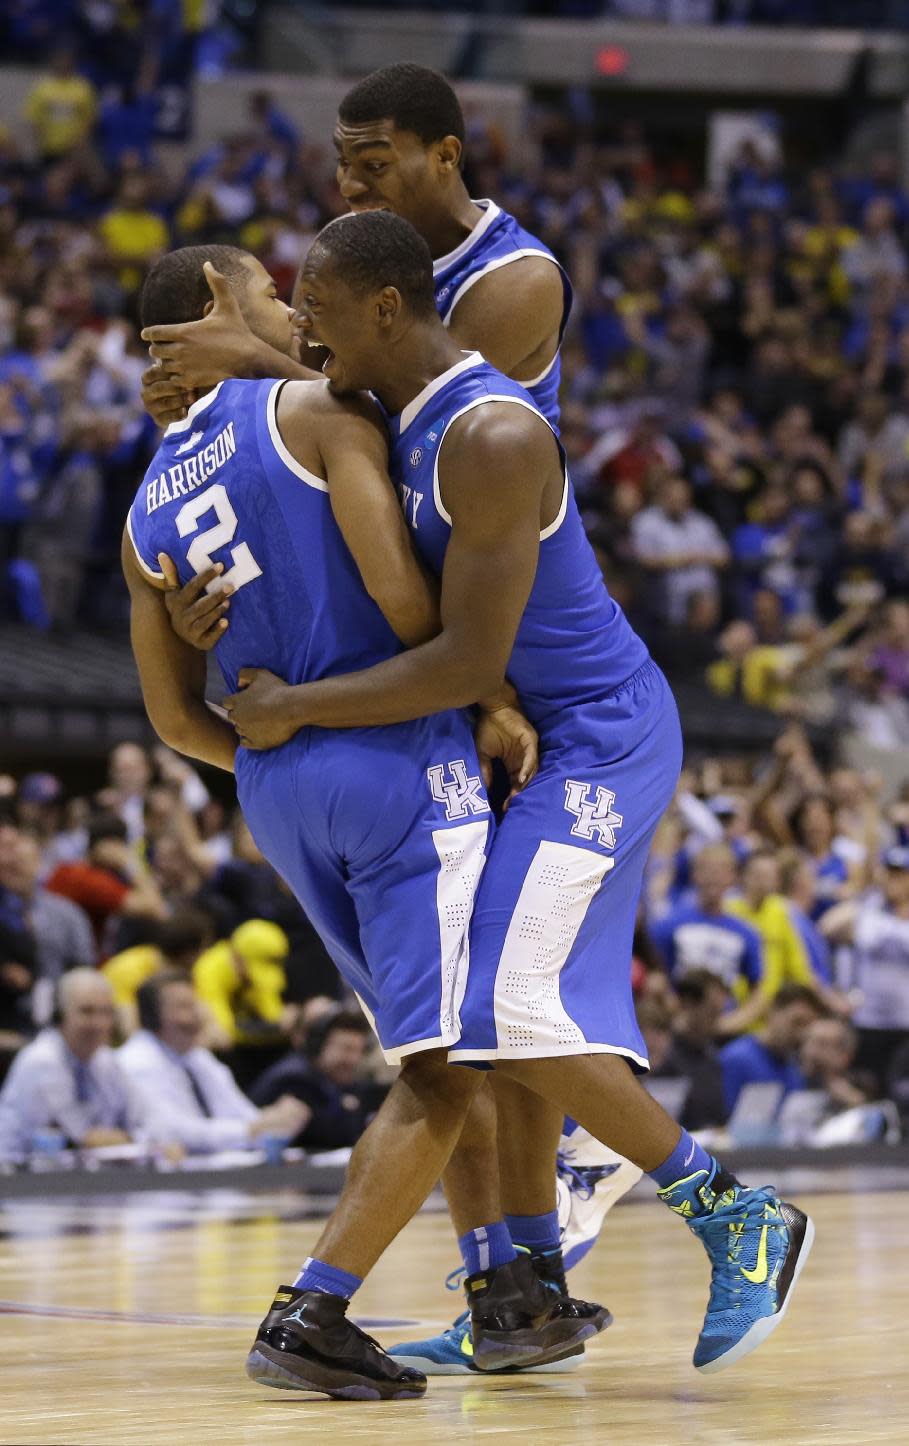 Kentucky's Aaron Harrison (2) is congratulated by teammates Julius Randle and Dakari Johnson after making a three-point basket in the final seconds of the second half of an NCAA Midwest Regional final college basketball tournament game against Michigan Sunday, March 30, 2014, in Indianapolis. Kentucky won 75-72 to advance to the Final Four. (AP Photo/Michael Conroy)